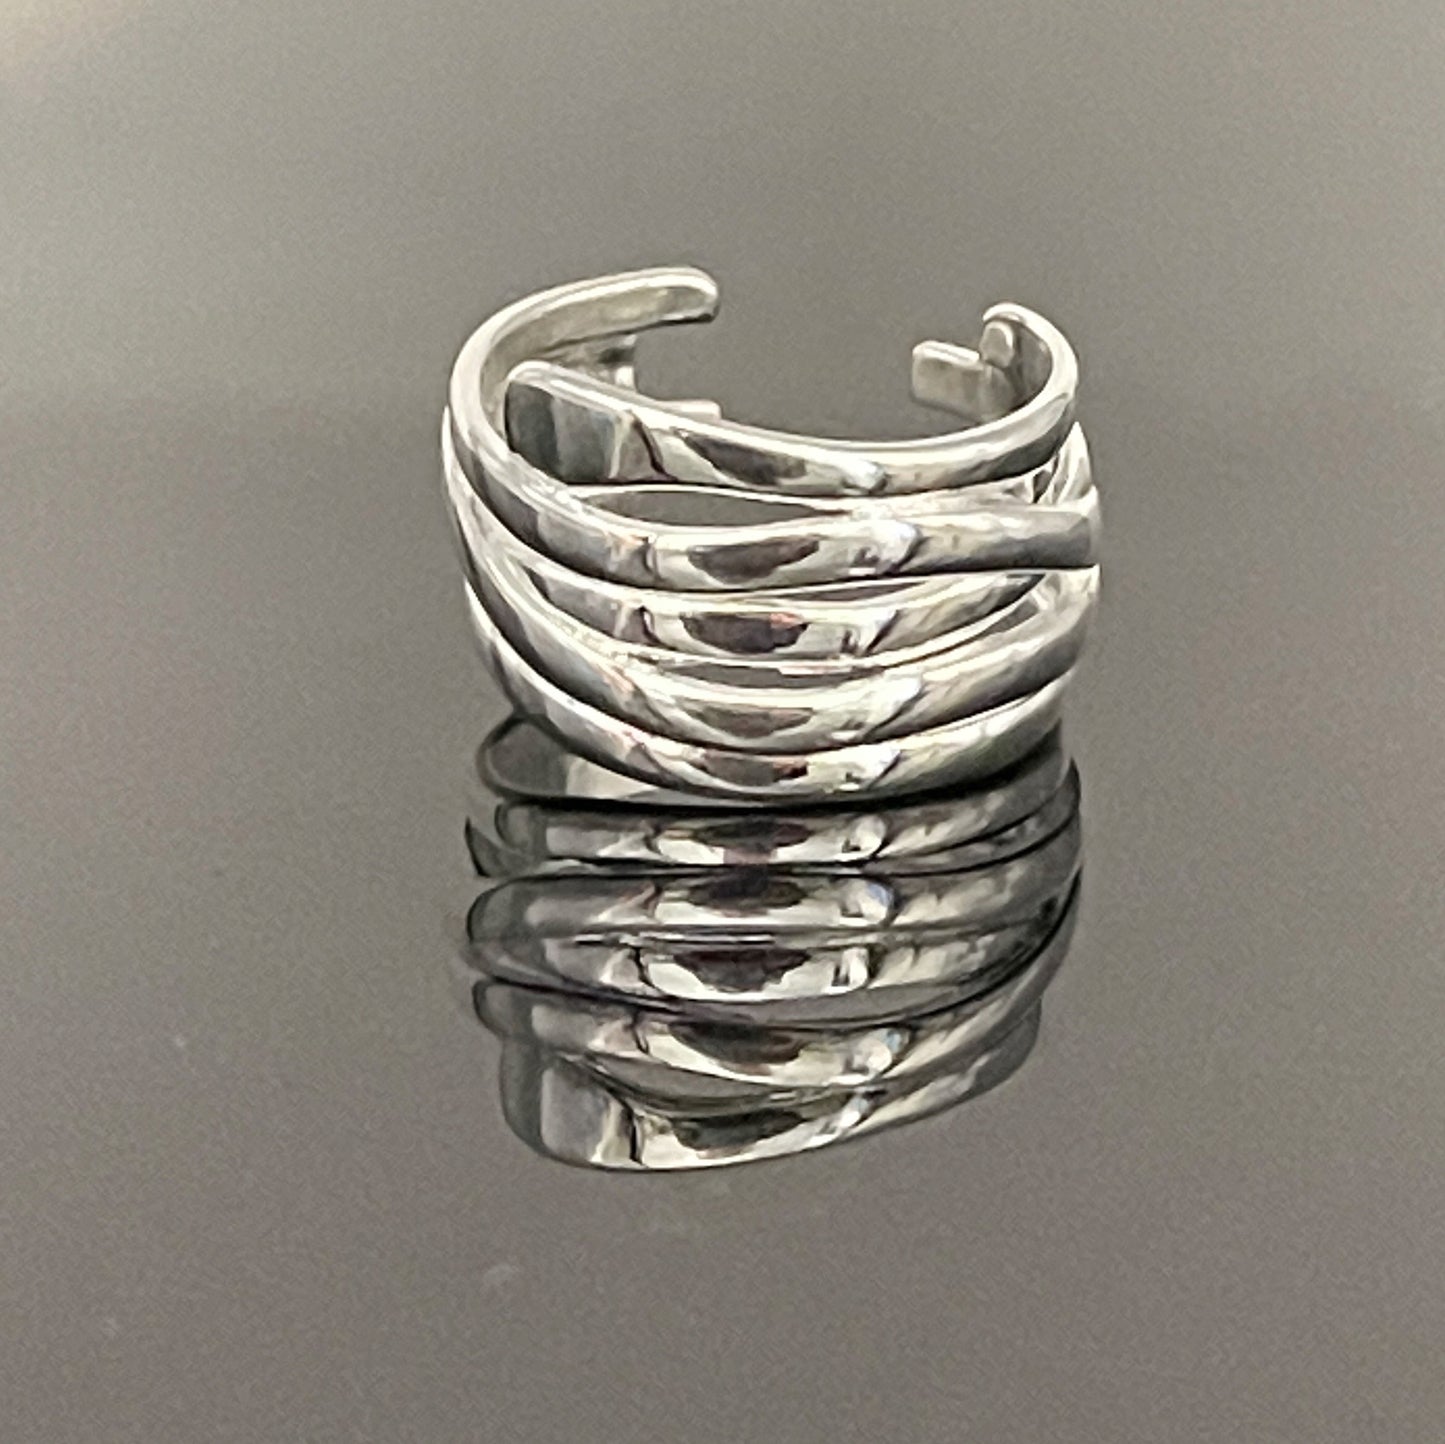 Niagra Sterling Silver Wrap Ring